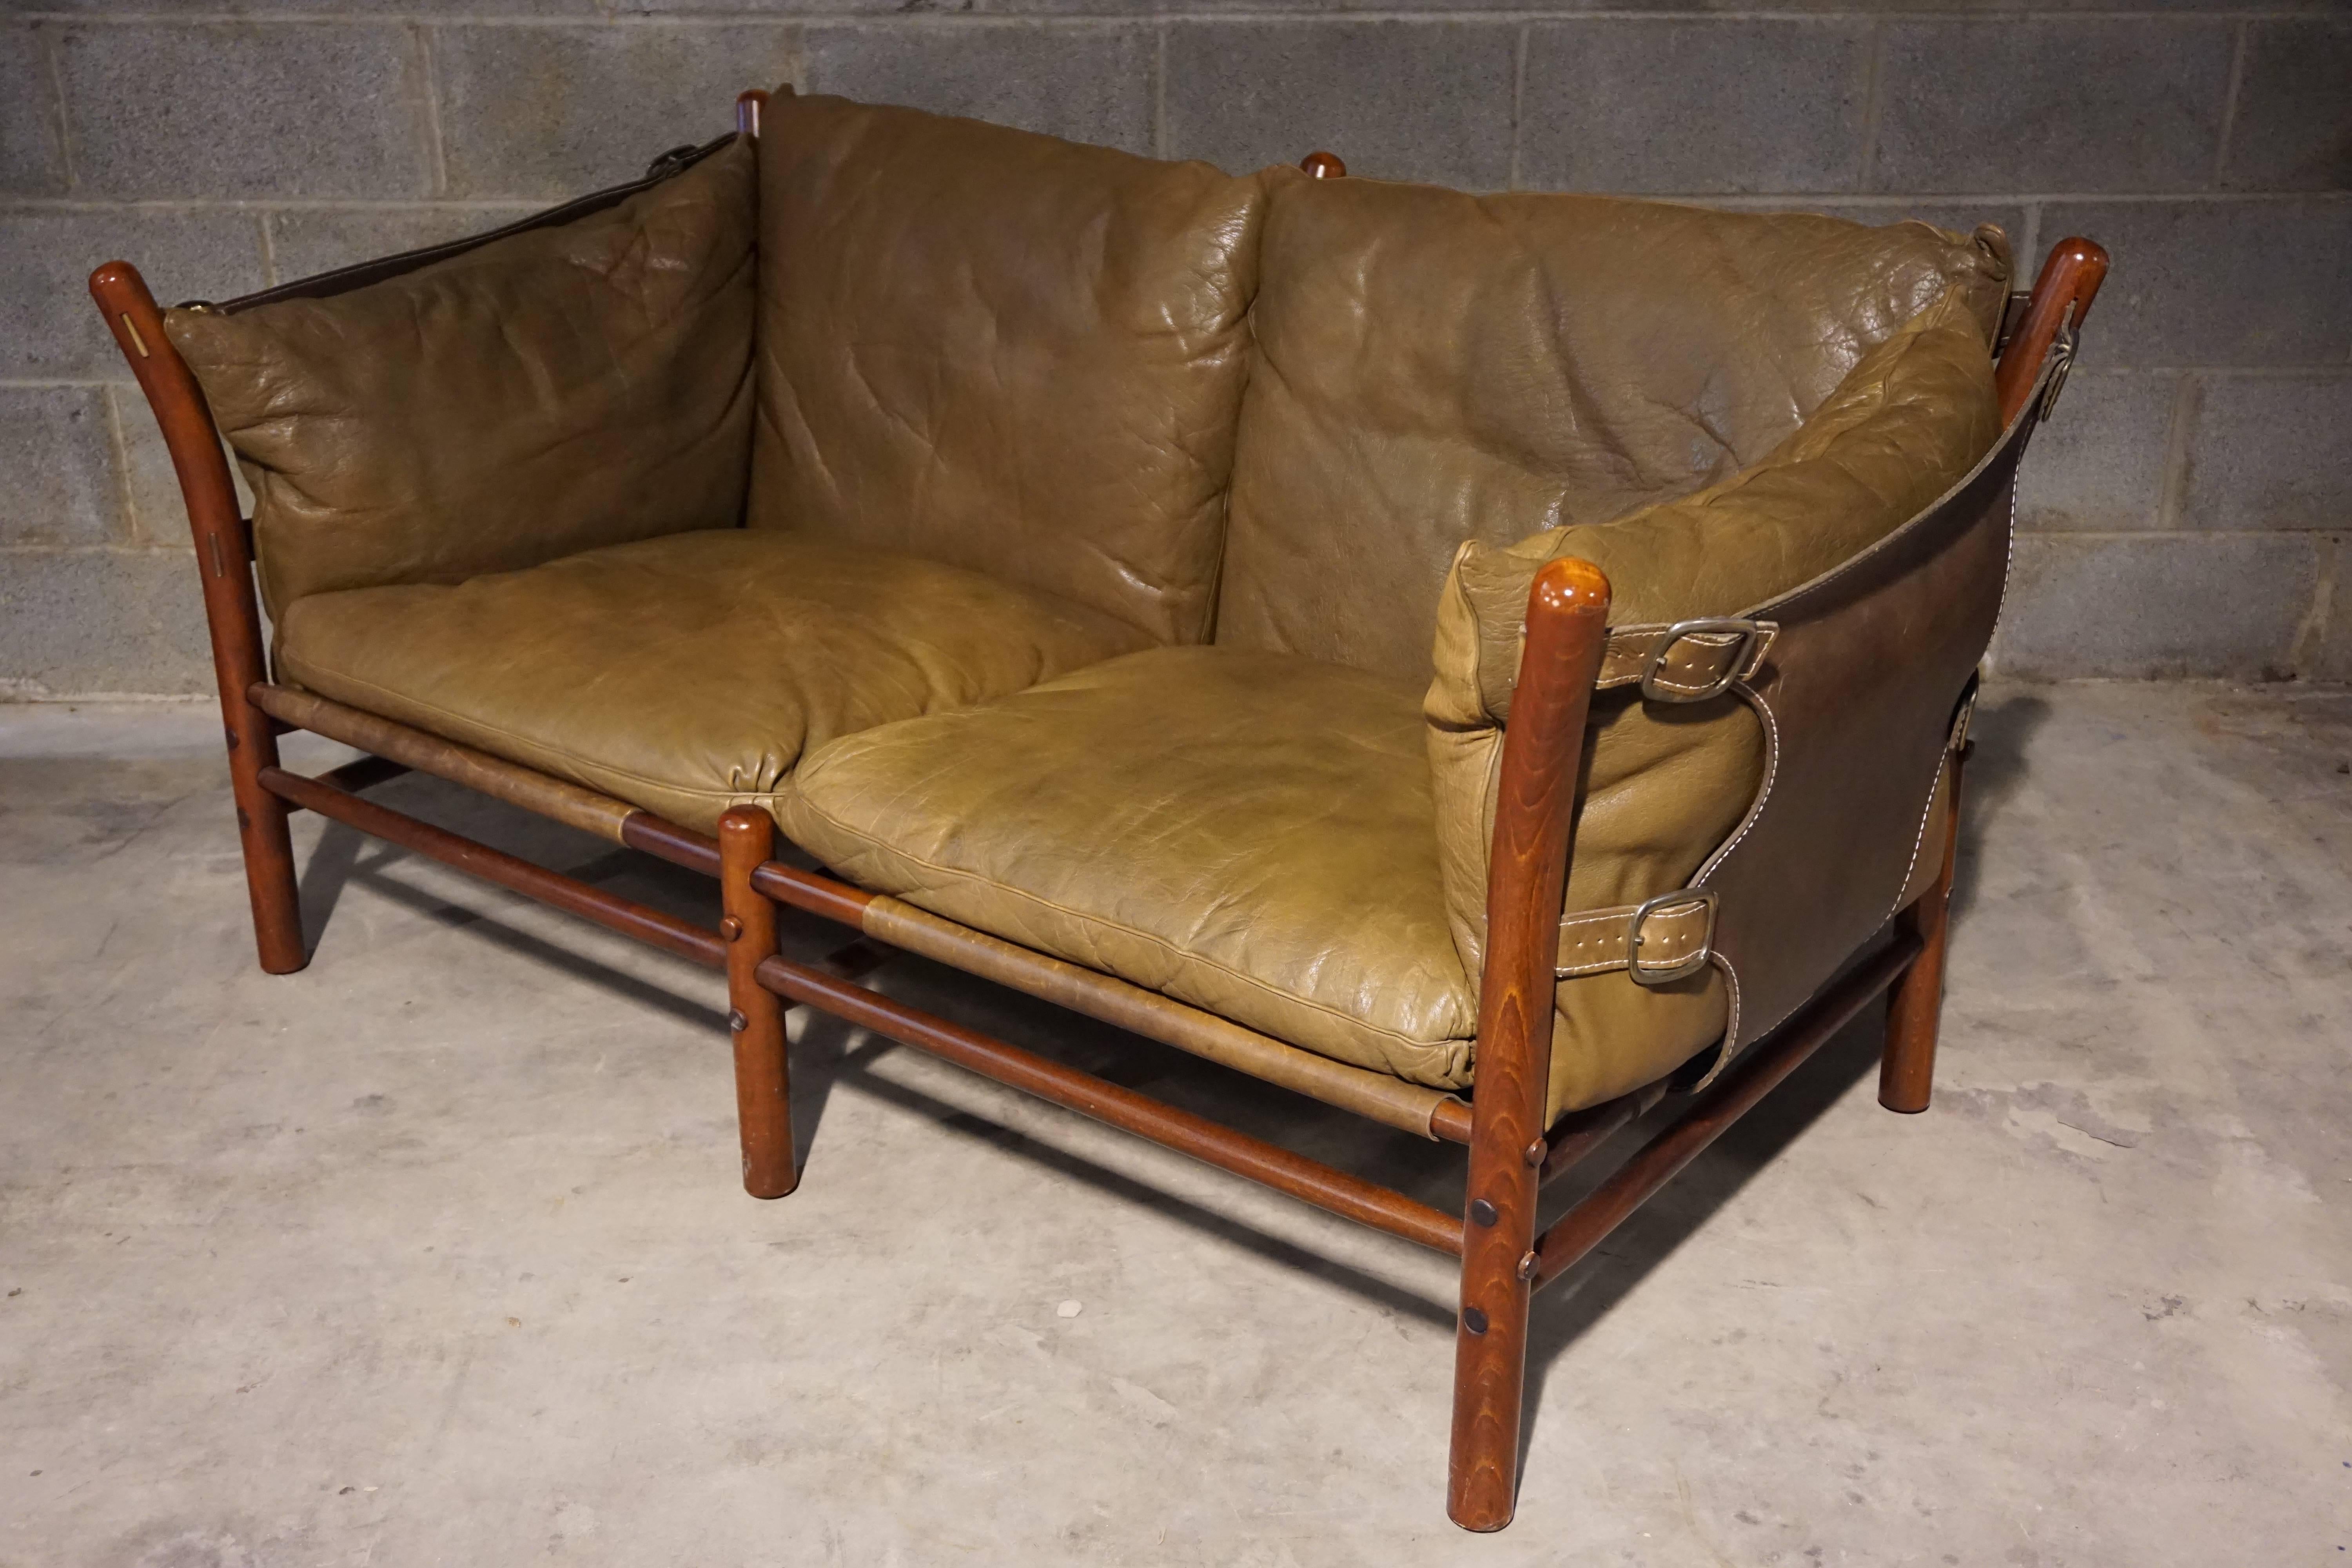 Two-seat leather sofa designed by Arne Norell. Beech frame and harness leather, Manufactured by Aneby Mobler, Sweden.
 